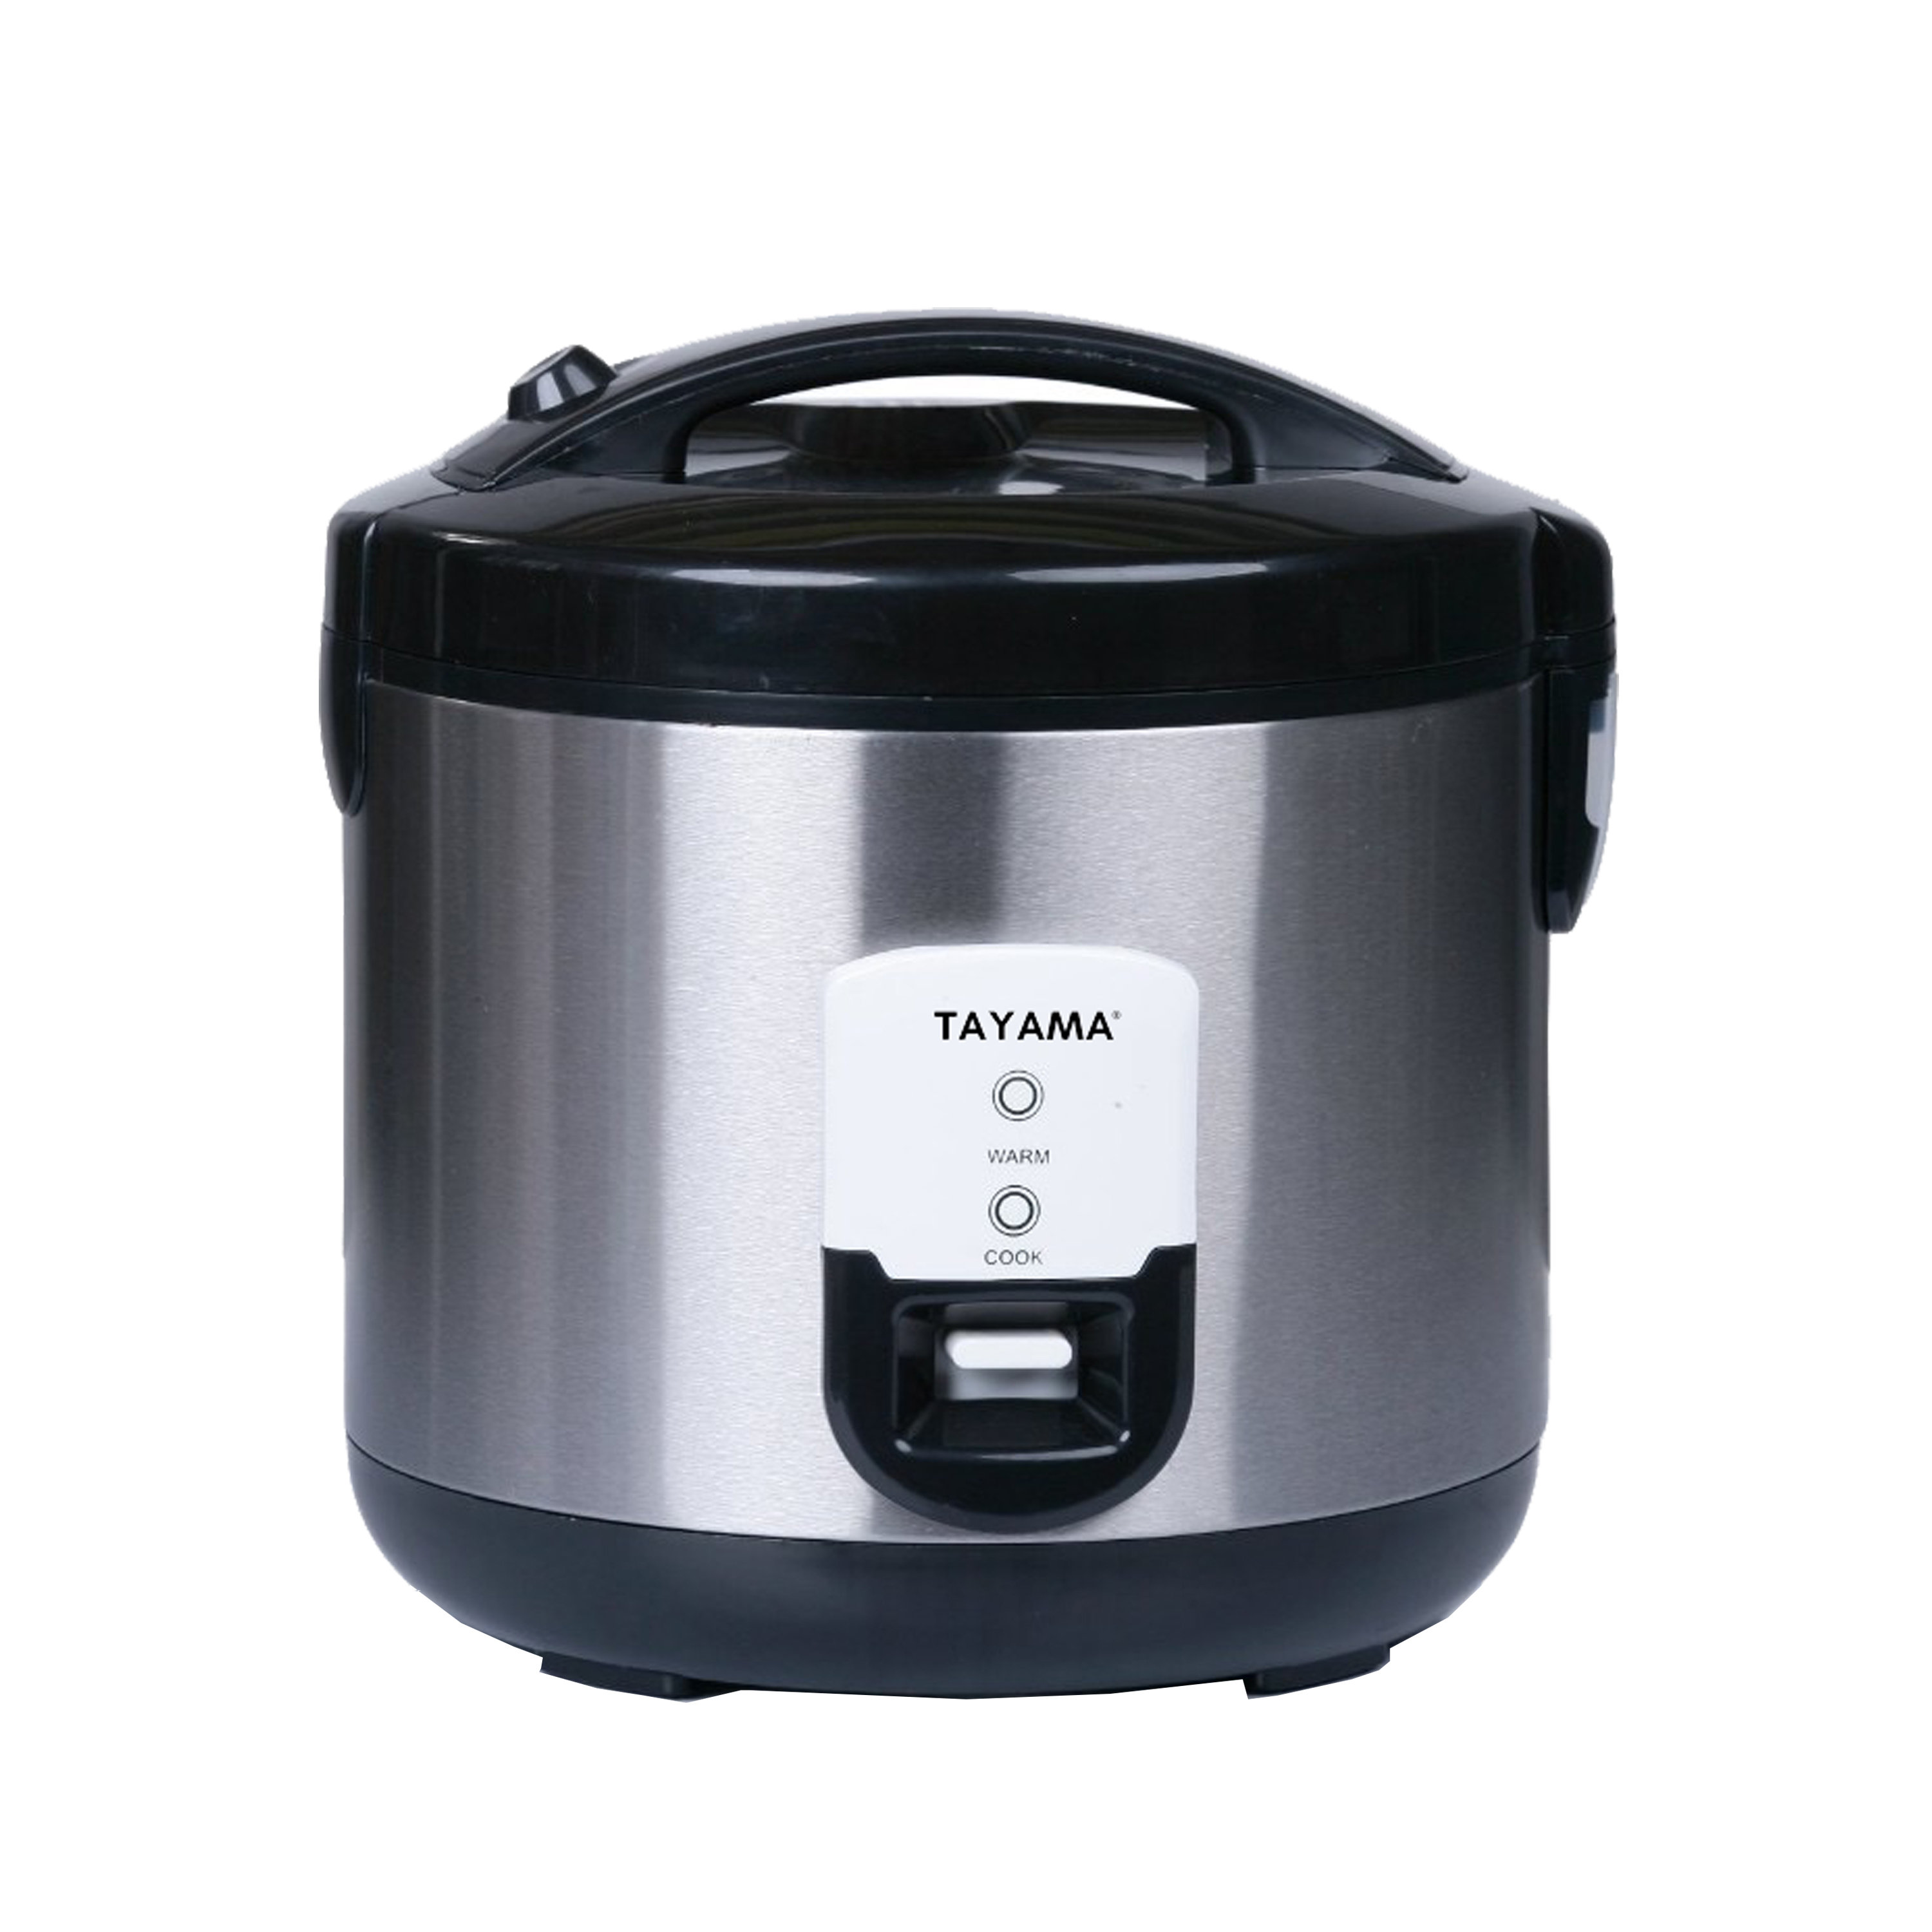 Imusa Electric Rice Cooker with Bowl 8 Cup (Uncooked) 16 Cup